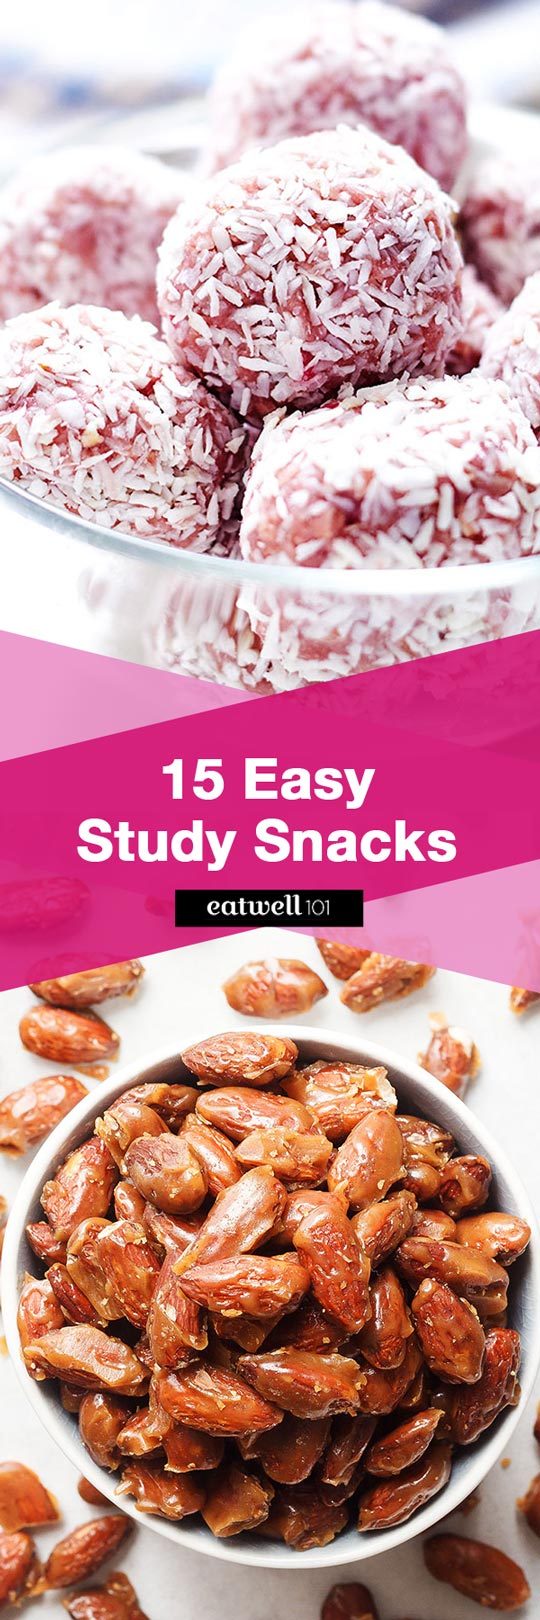 15 study snack recipes that are easy, wholesome and yummy to help keep your mind focused!